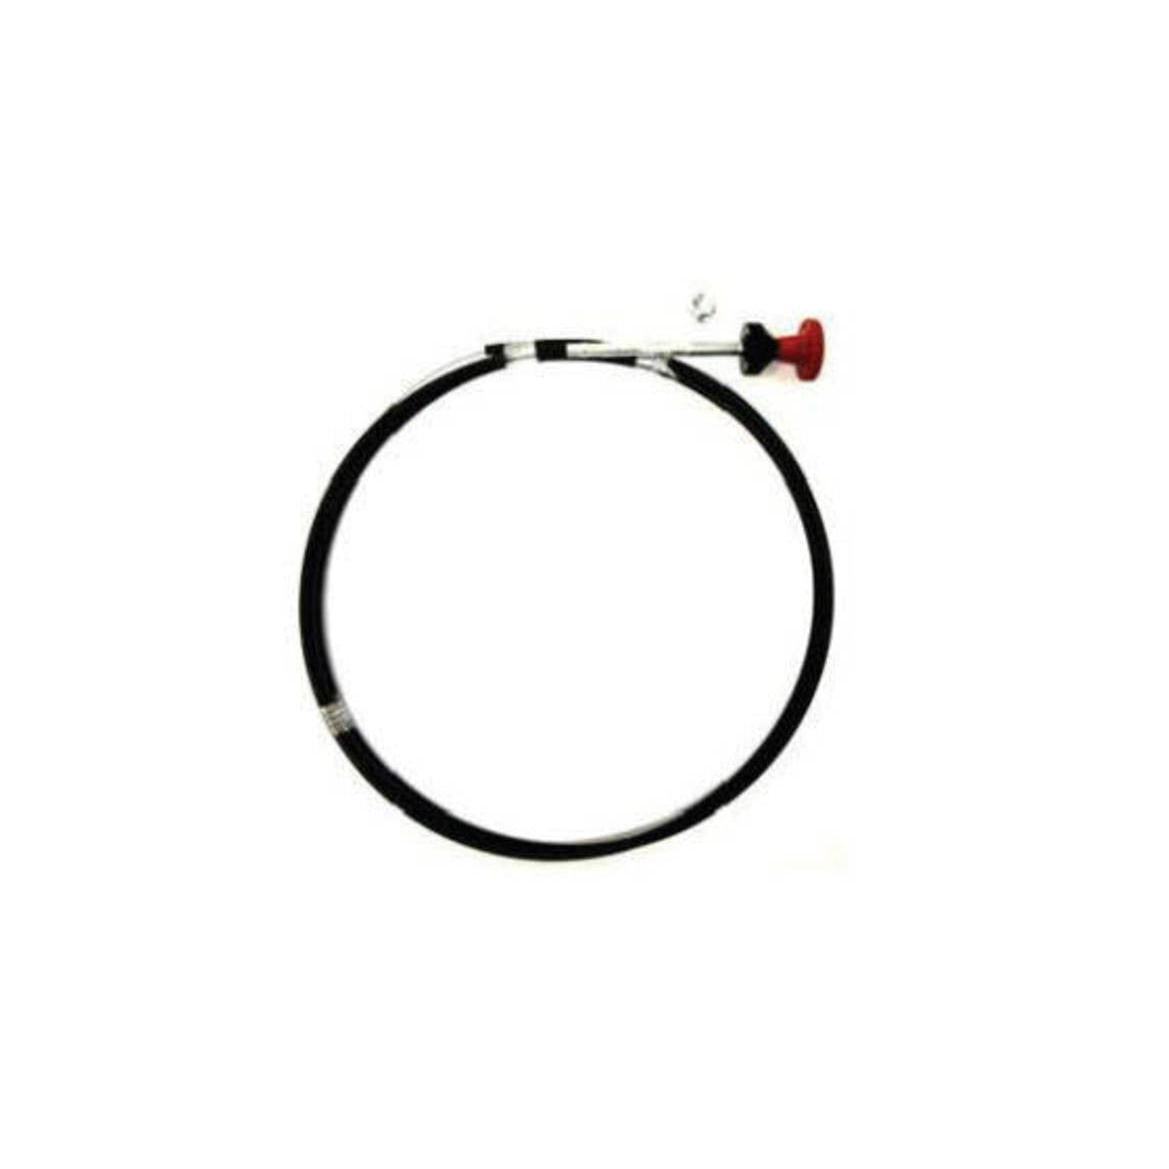 78" Engine Stop Cable Replaces 21QB3249RP78